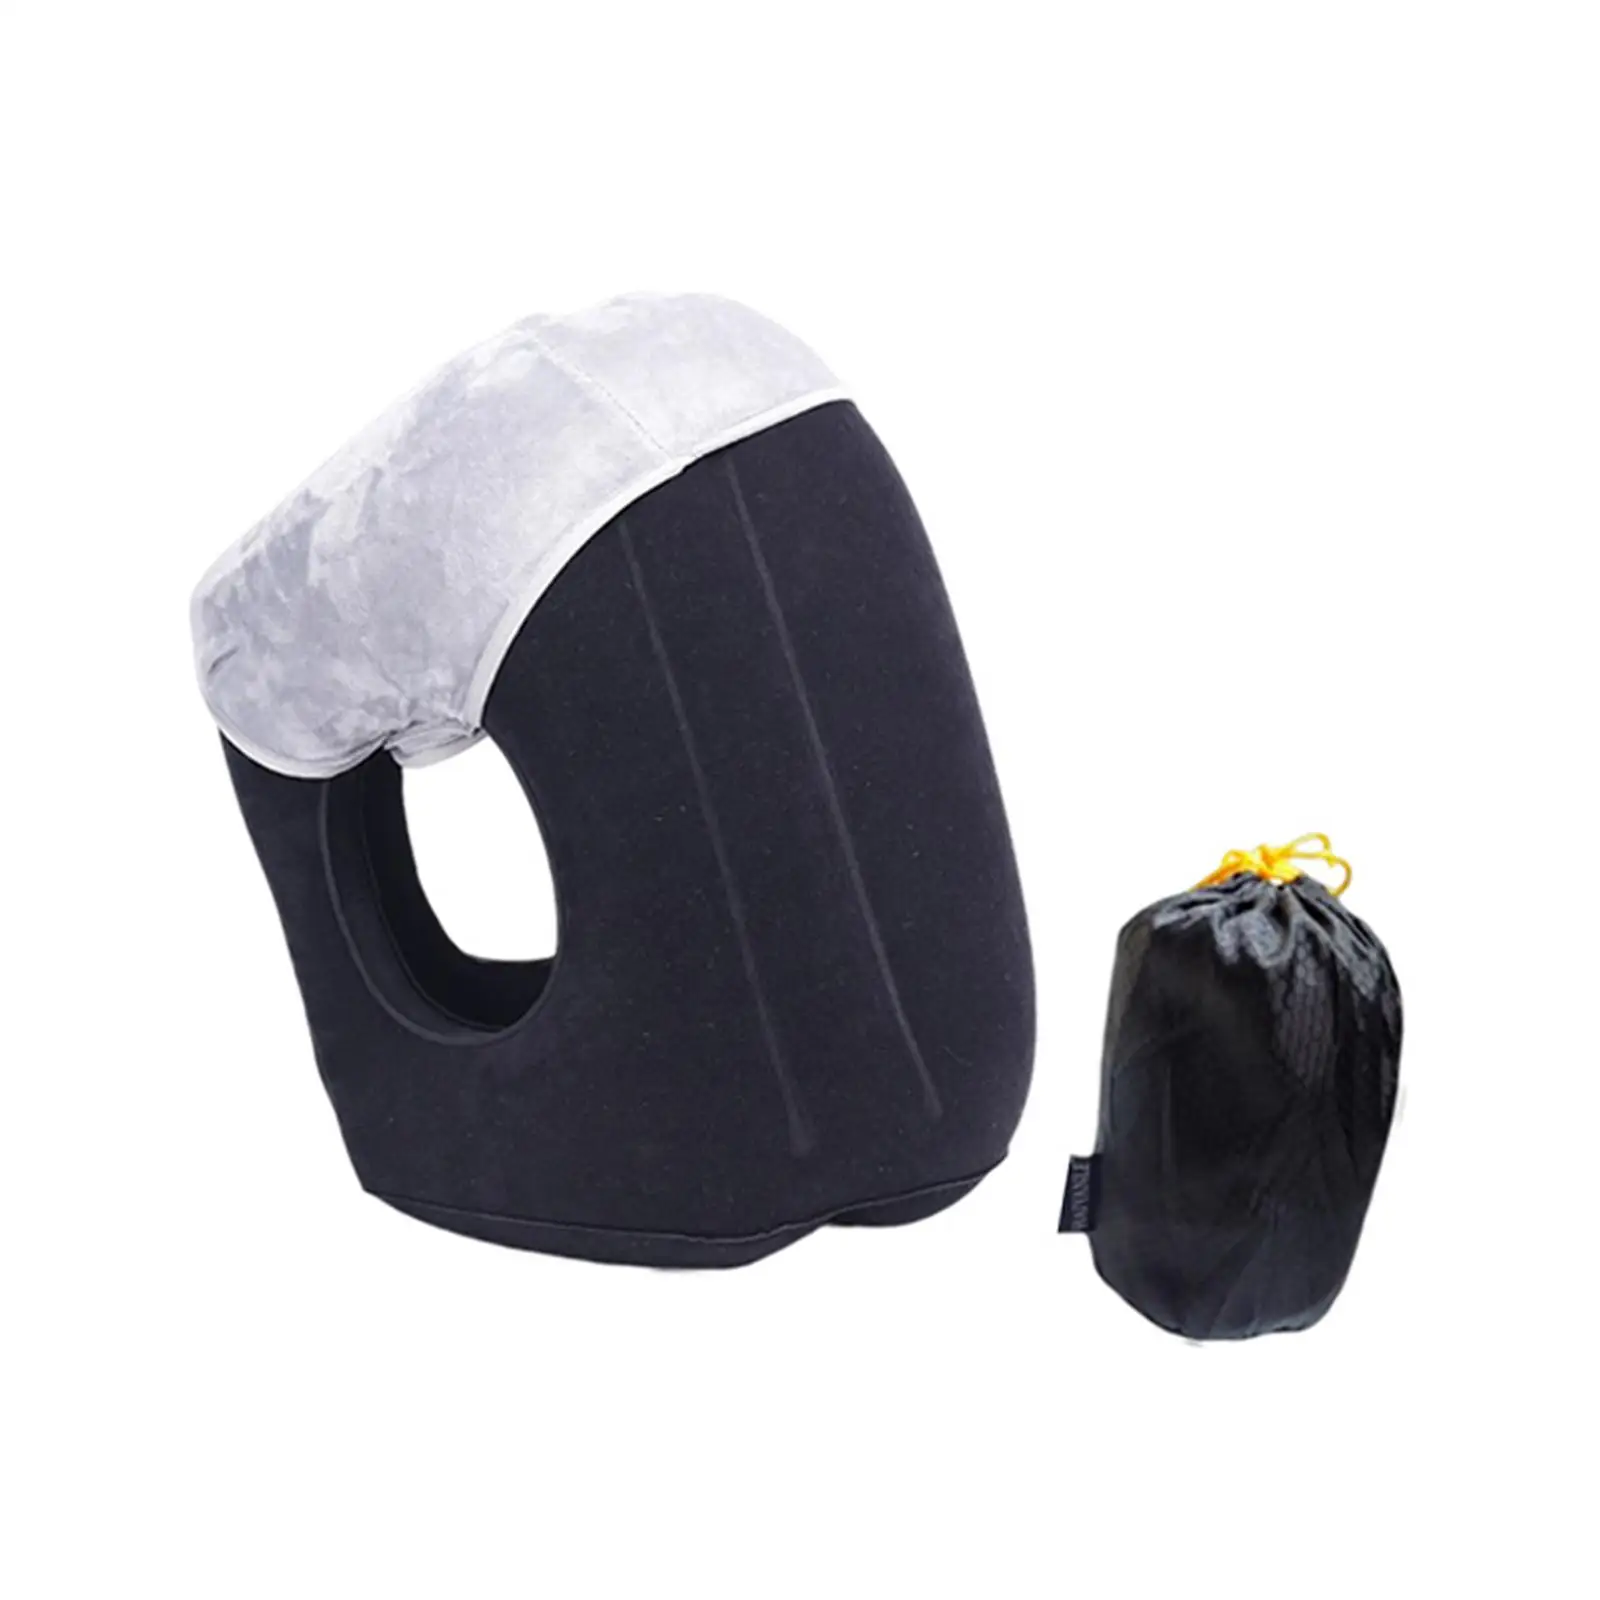 Folding Inflatable Travel Pillow with Drawstring Bag Comfortably Support Head Inflatable Air Pillow for Car Train Sleeping